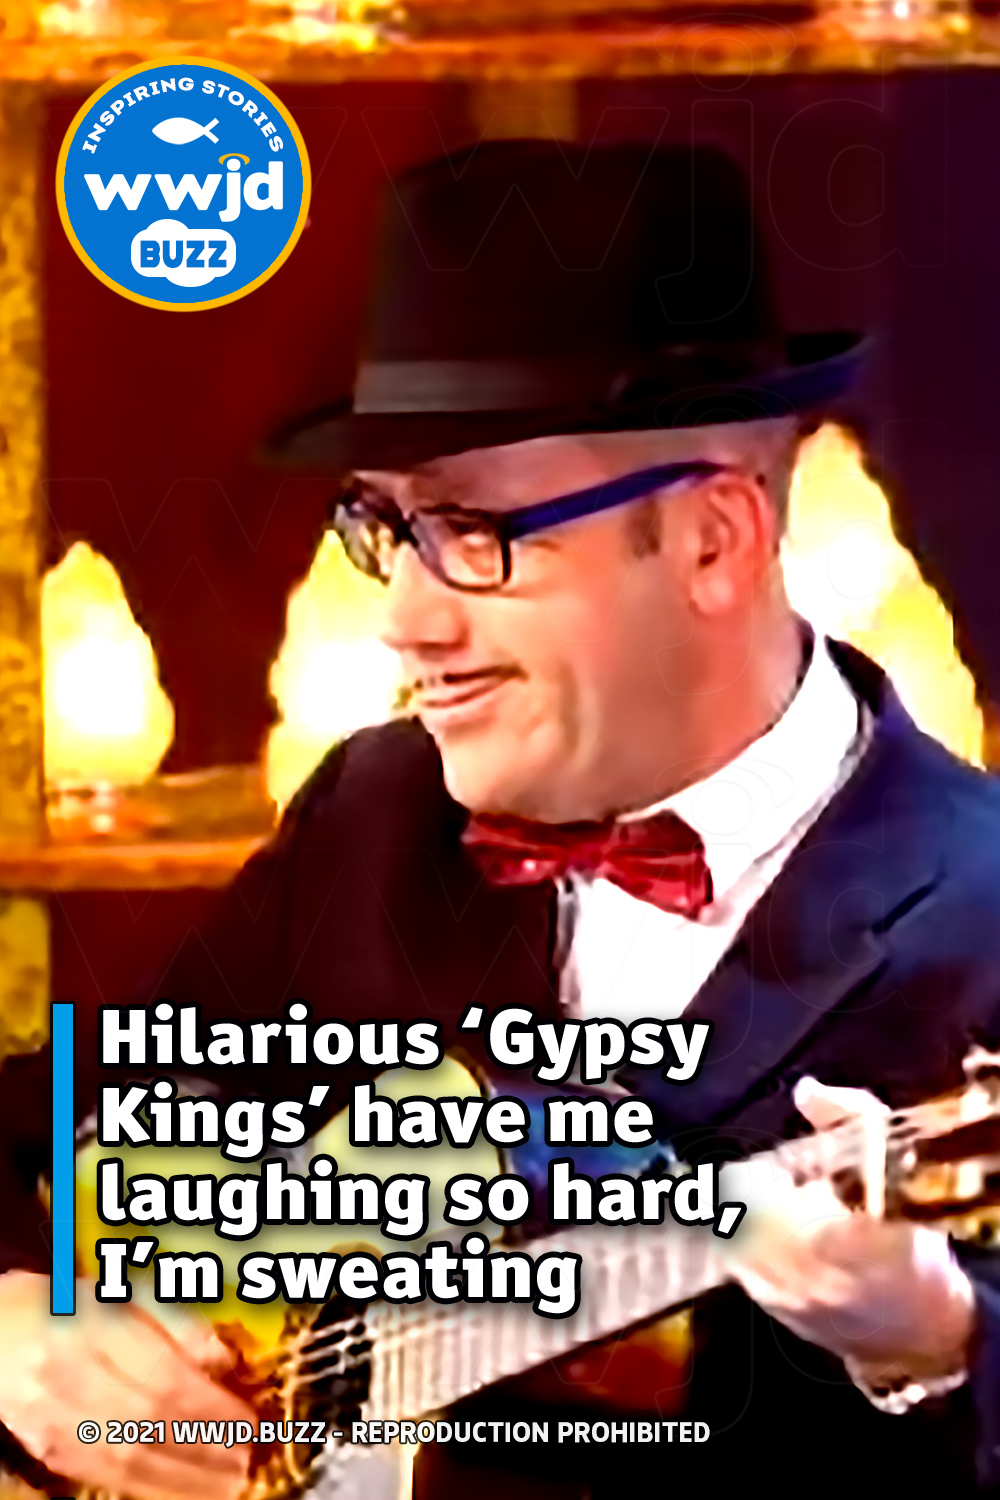 Hilarious ‘Gypsy Kings’ have me laughing so hard, I’m sweating